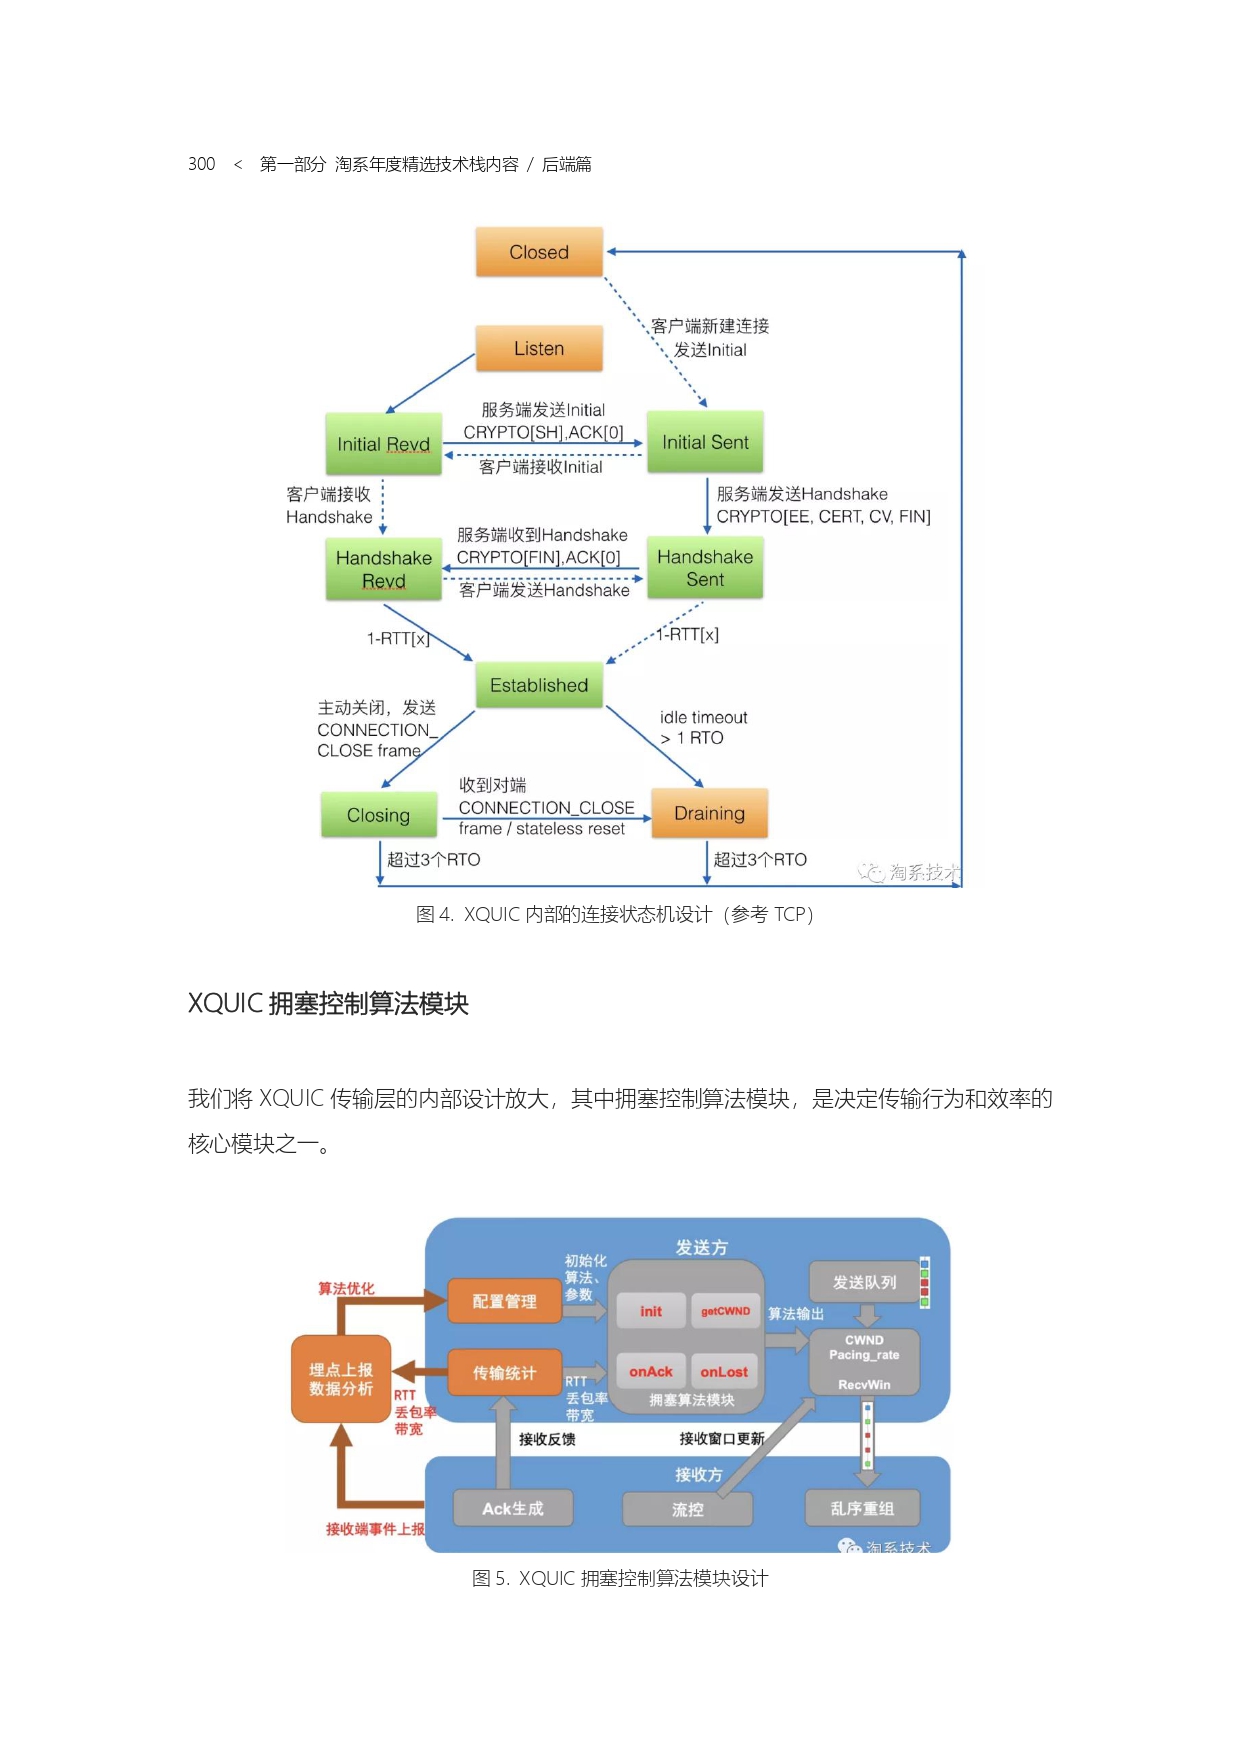 The Complete Works of Tao Technology 2020-1-570_page-0300.jpg